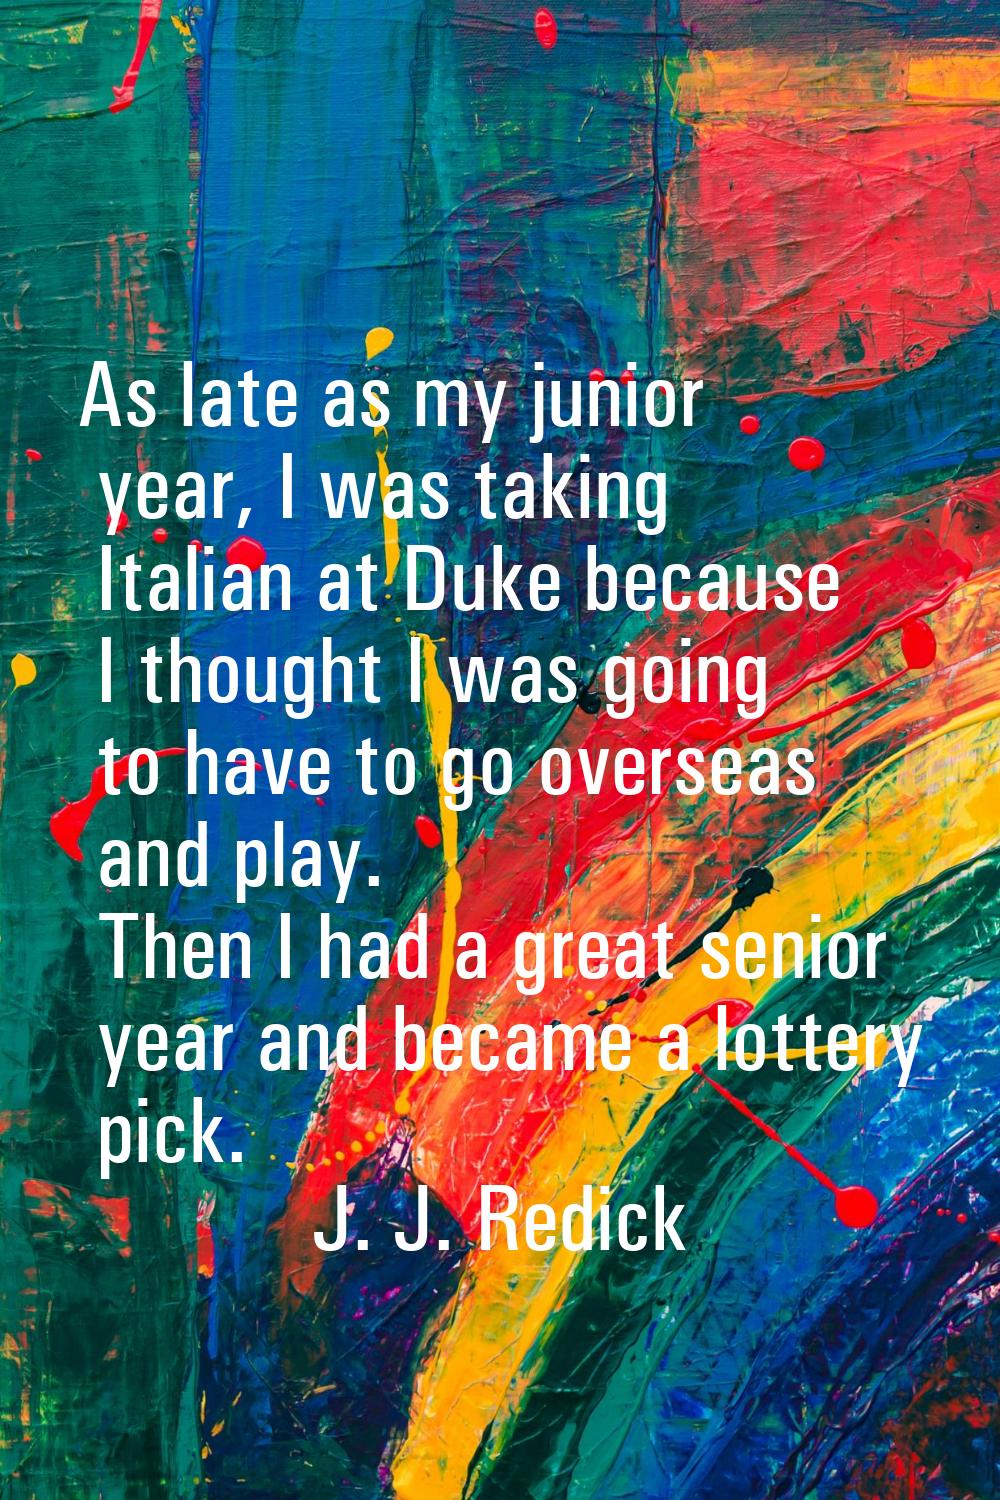 As late as my junior year, I was taking Italian at Duke because I thought I was going to have to go